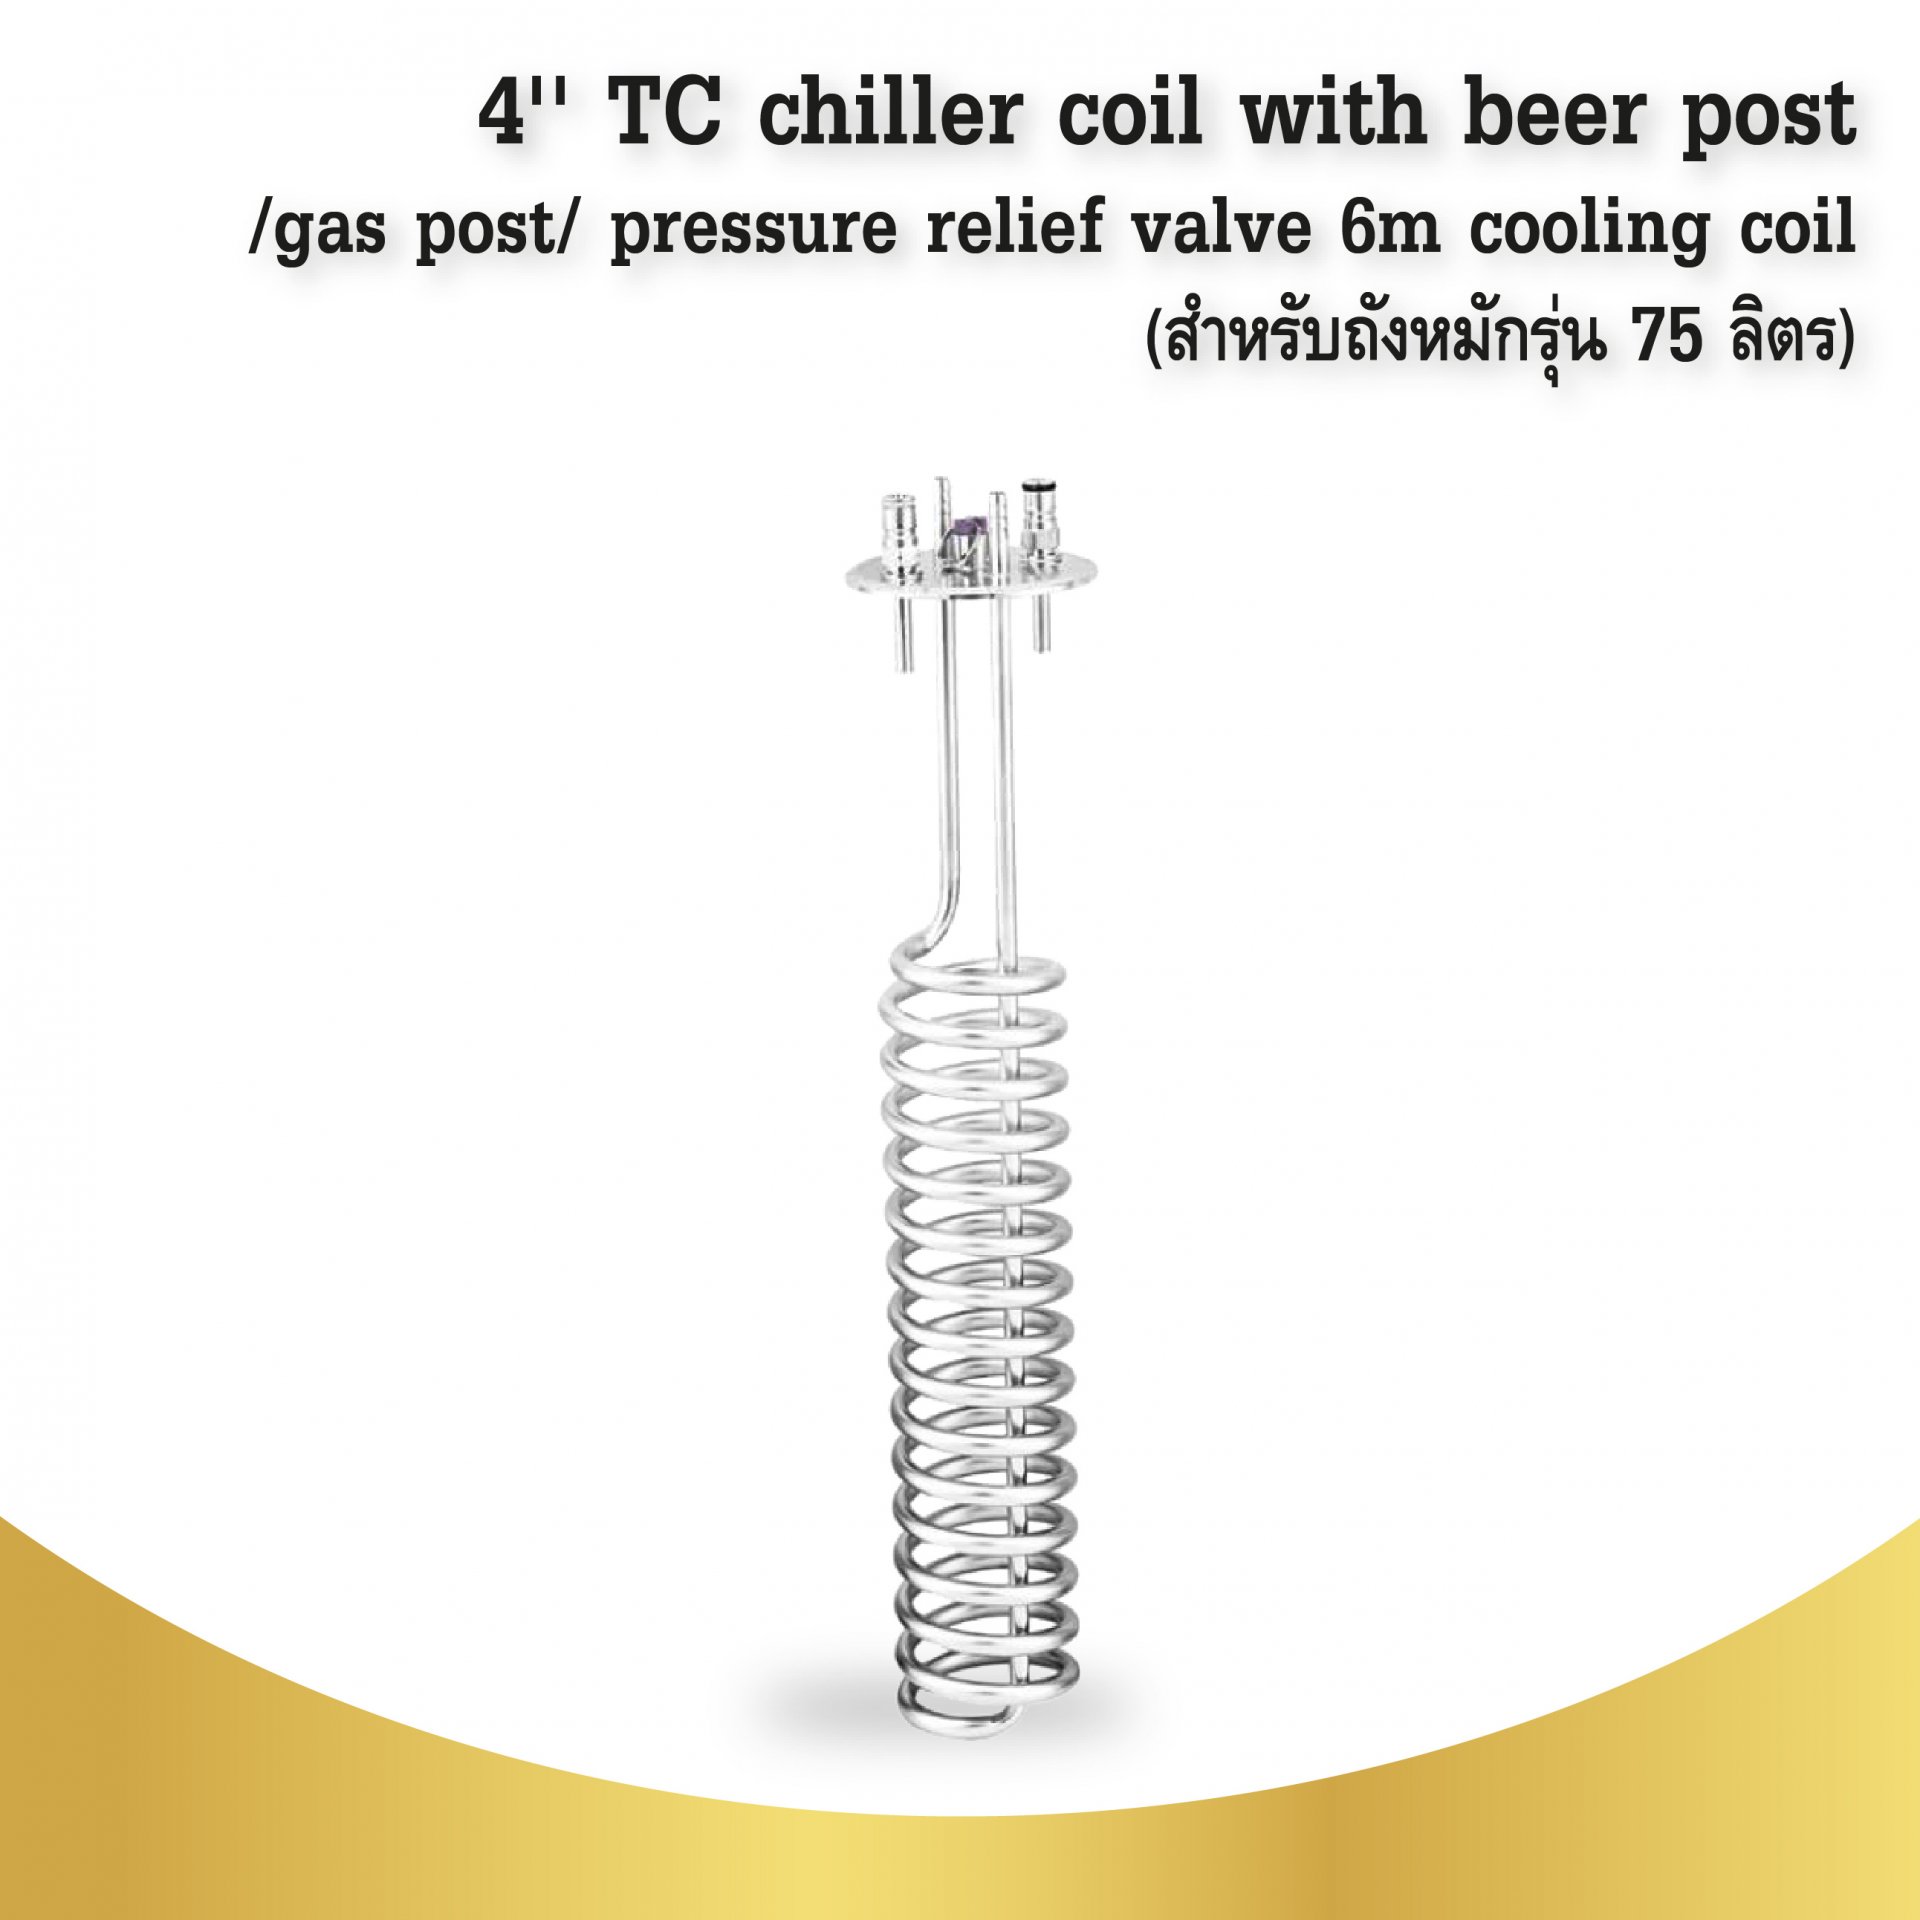 4'' TC chiller coil with beer post/gas post/ pressure relief valve 6m cooling coil